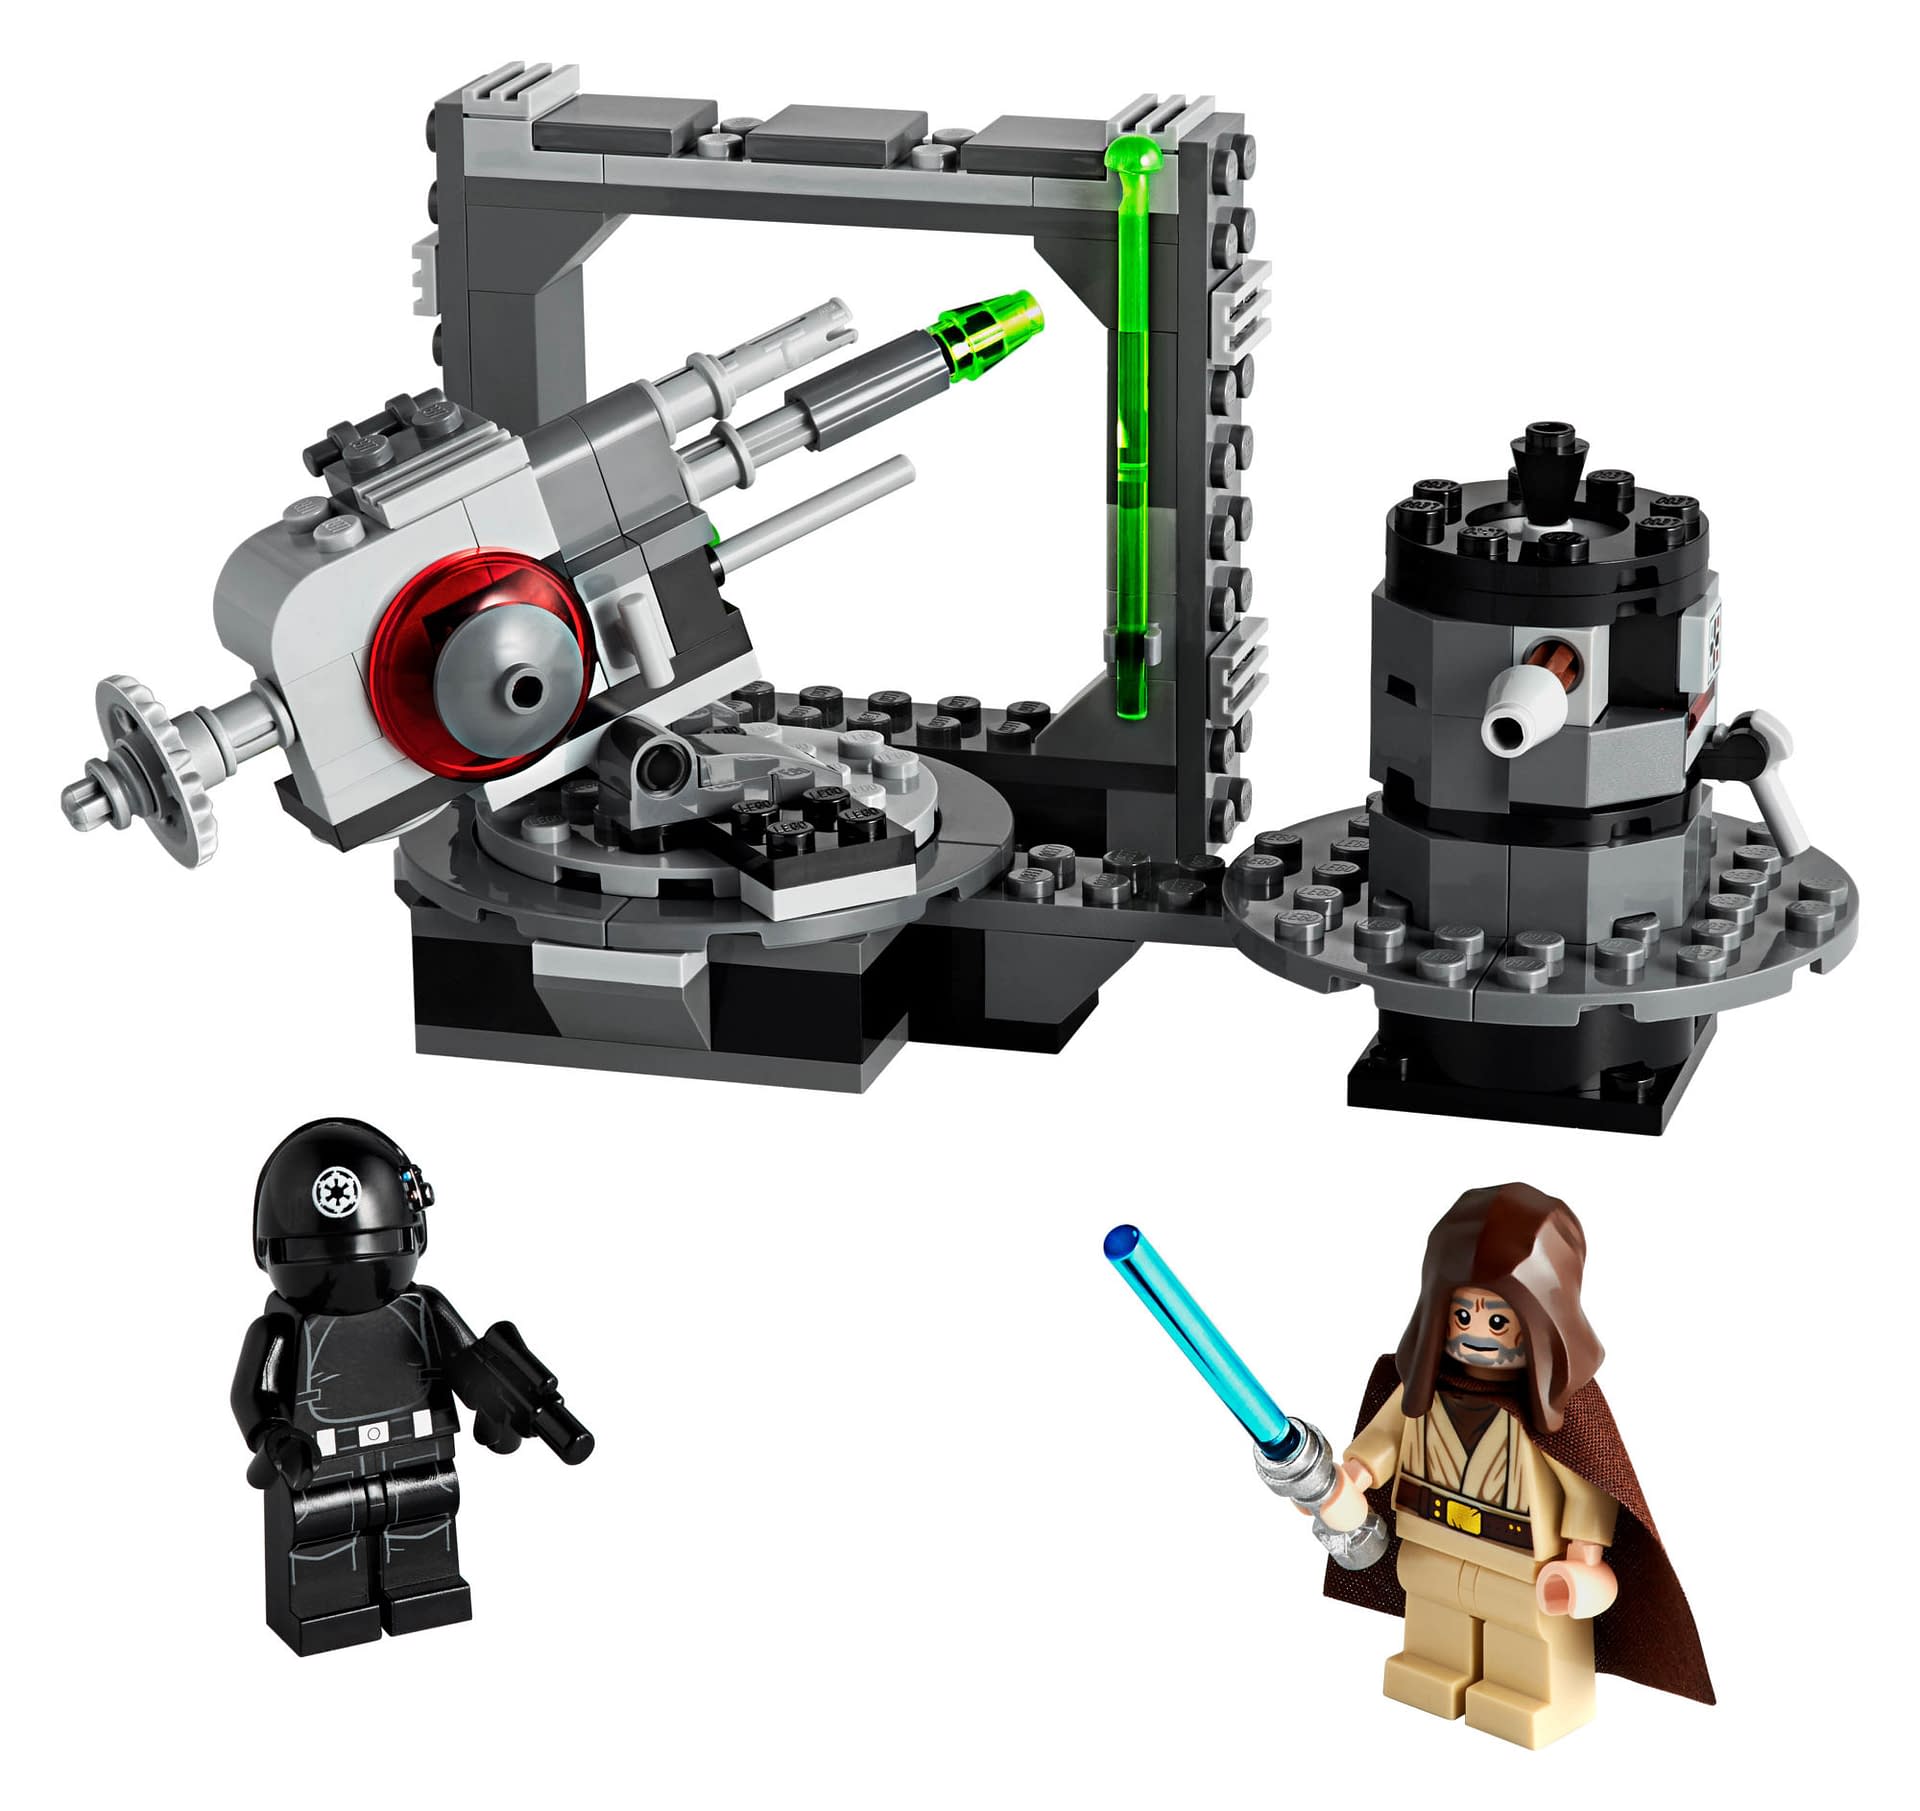 LEGO's new Star Wars: The Last Jedi sets released for Force Friday